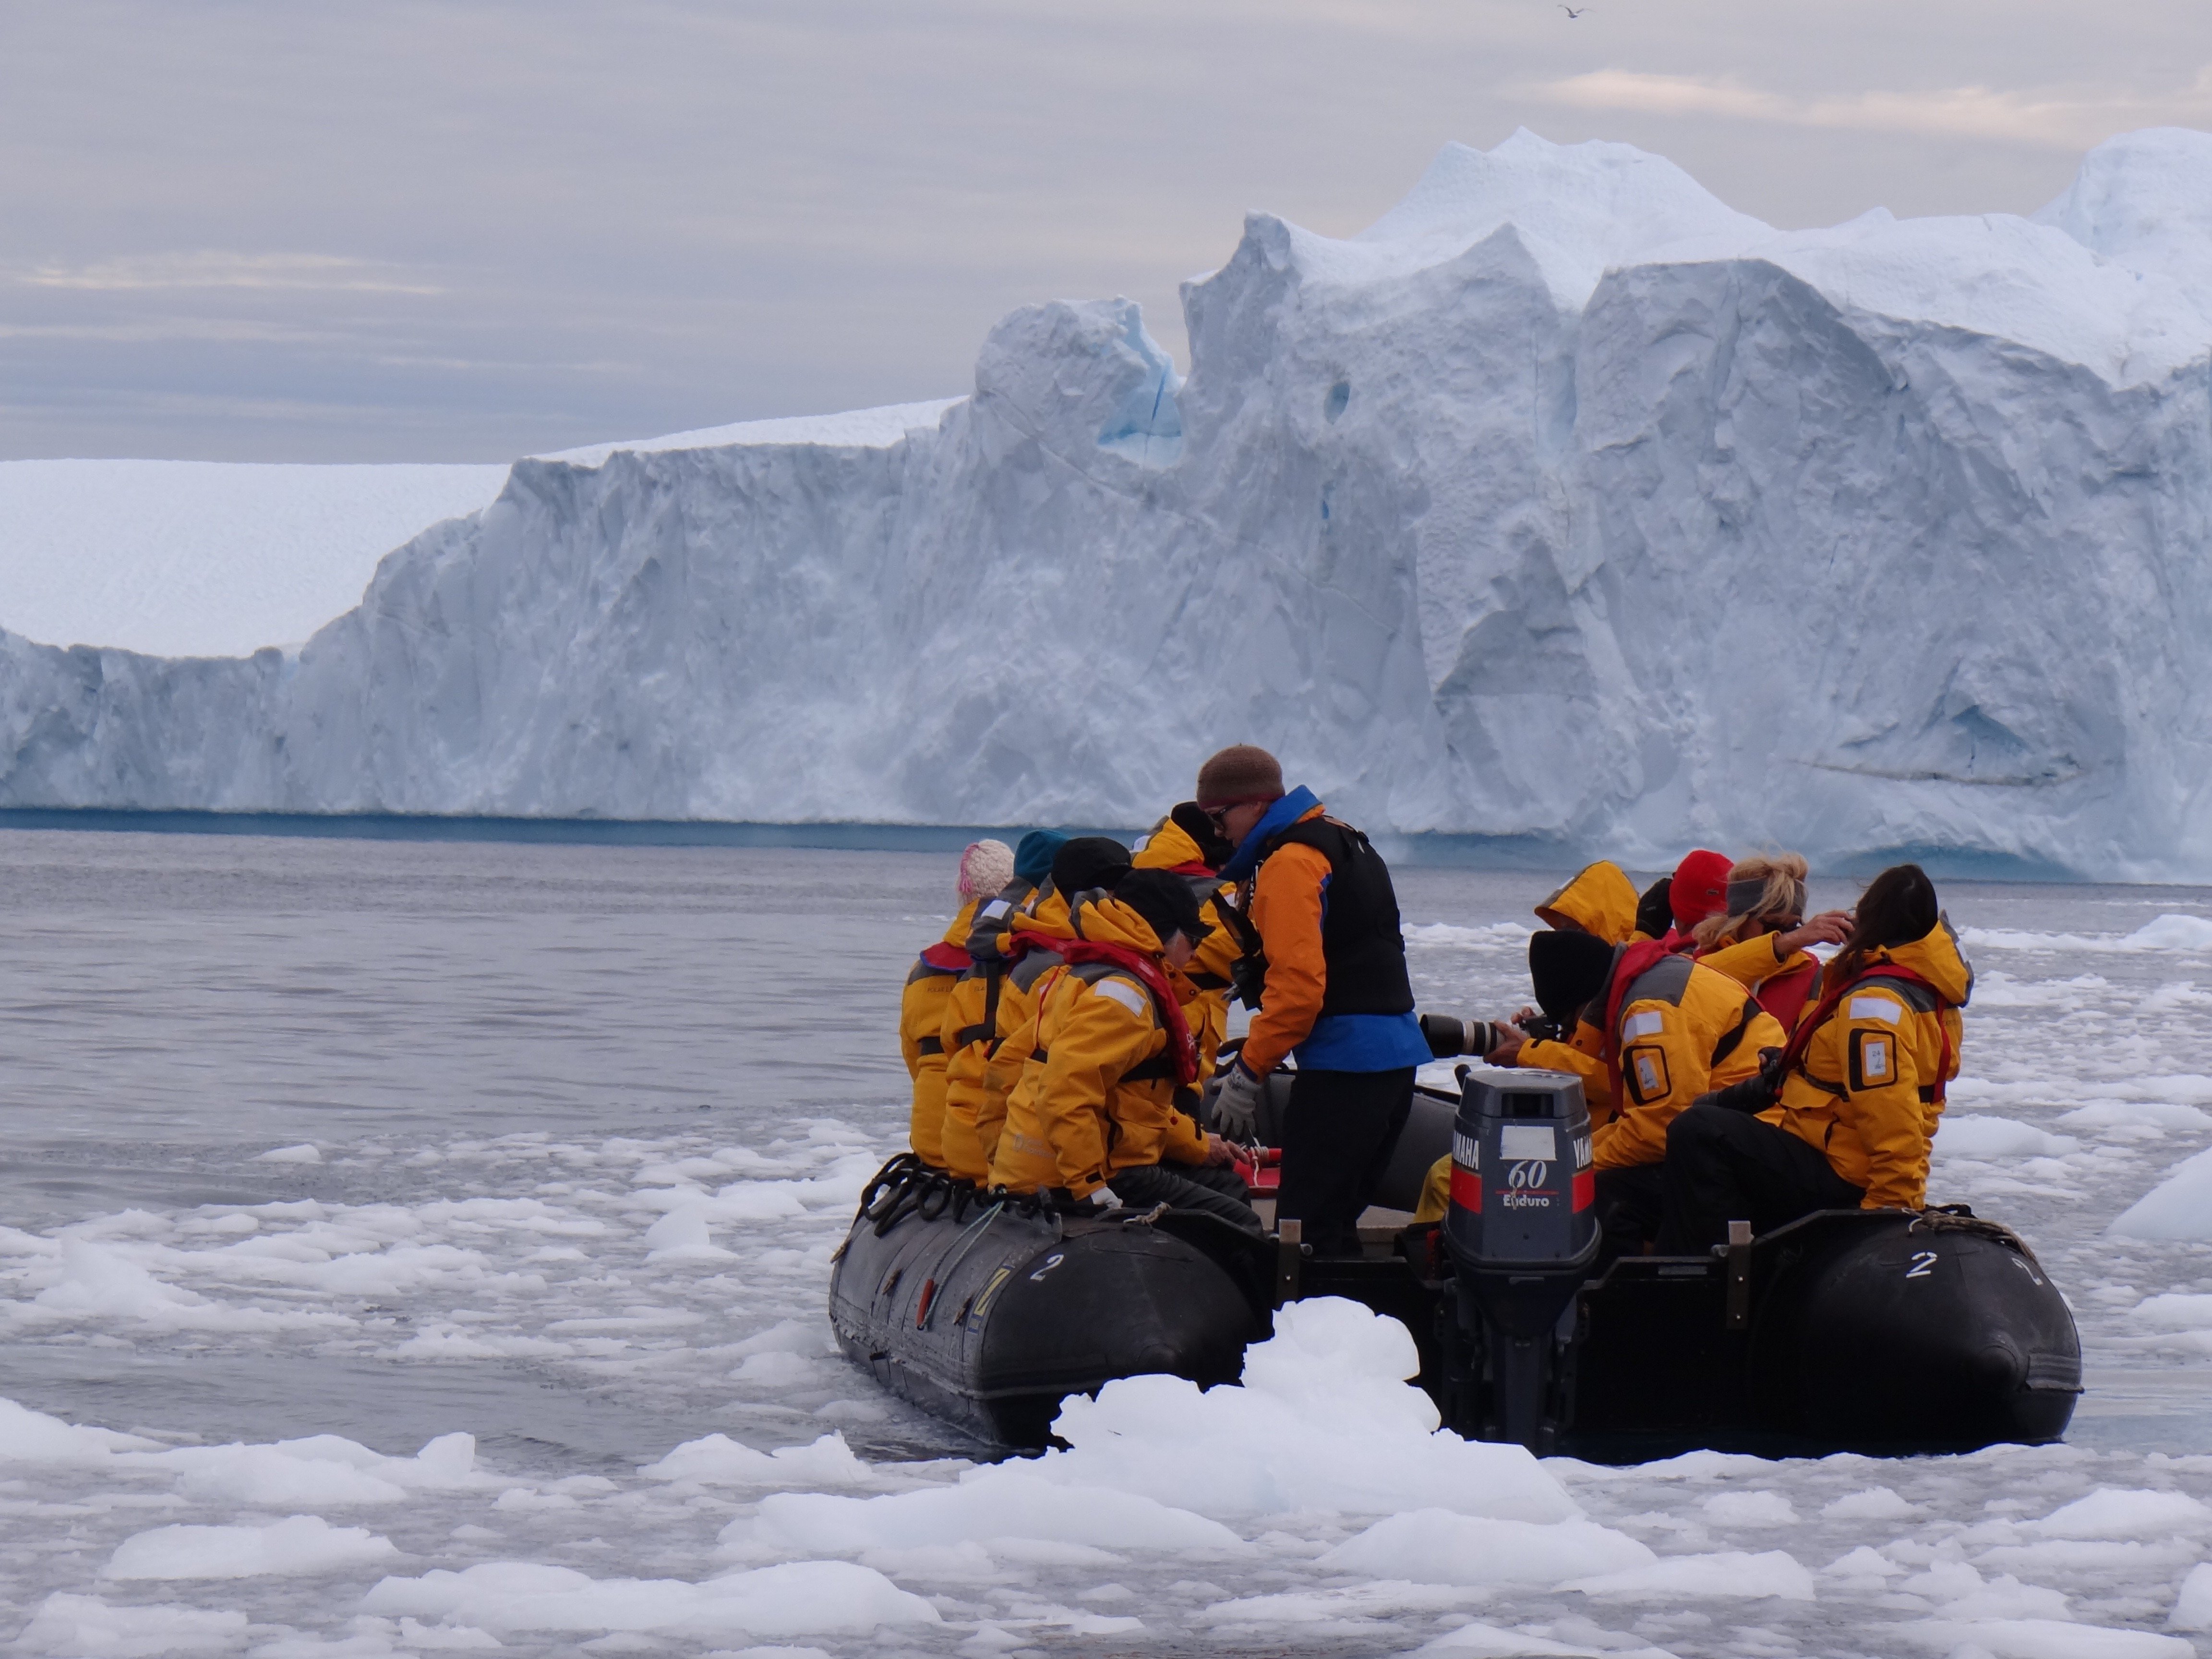 Riding zodiacs in the Arctic 